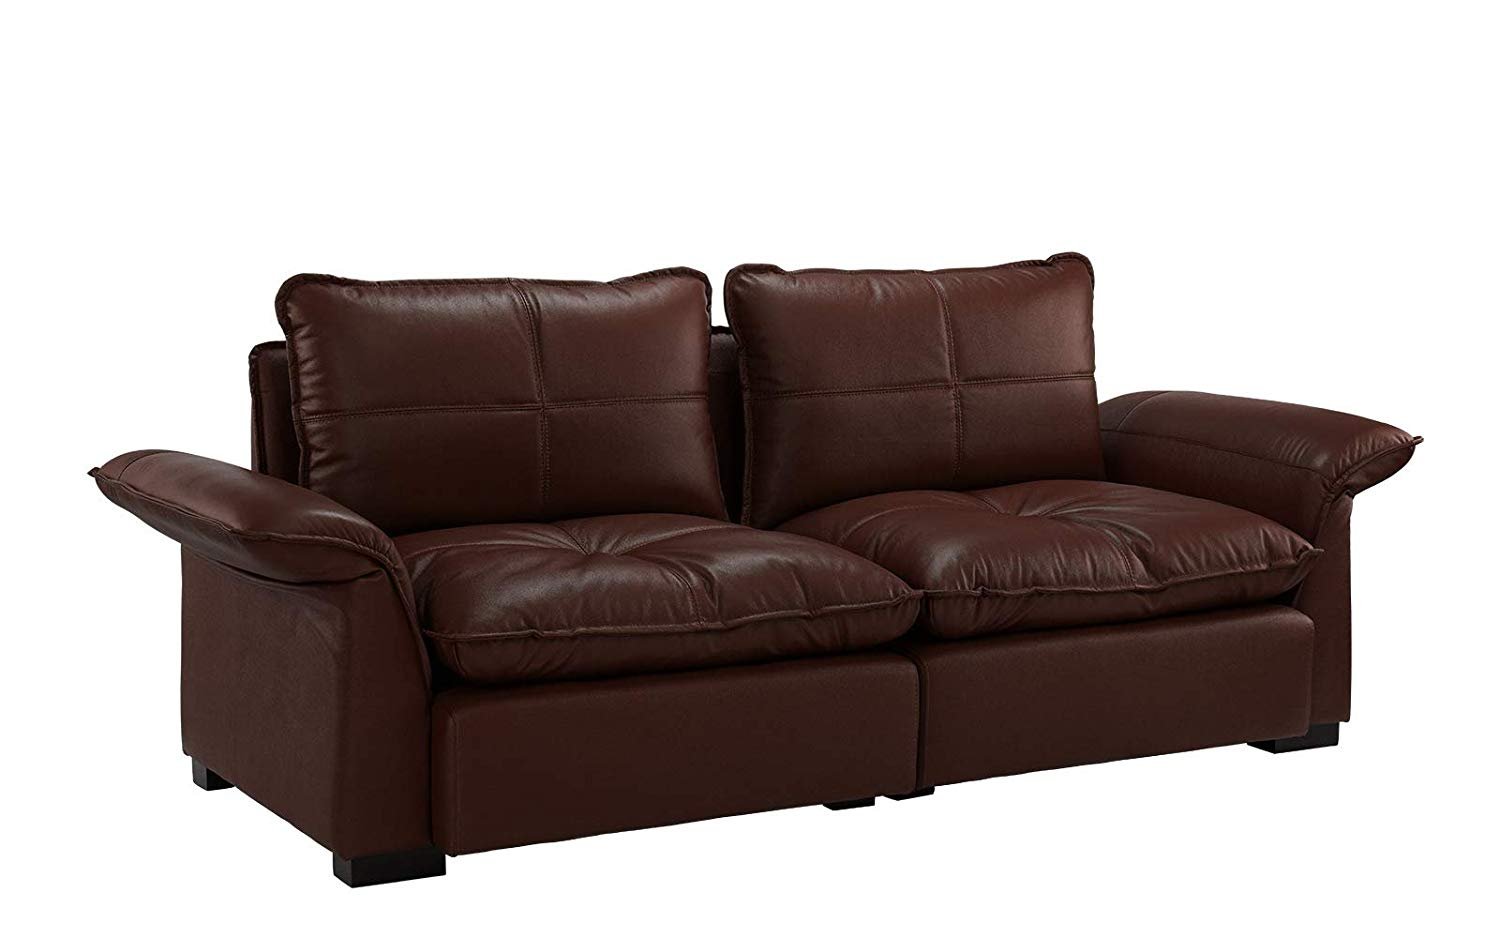 leather sofa with arm rests